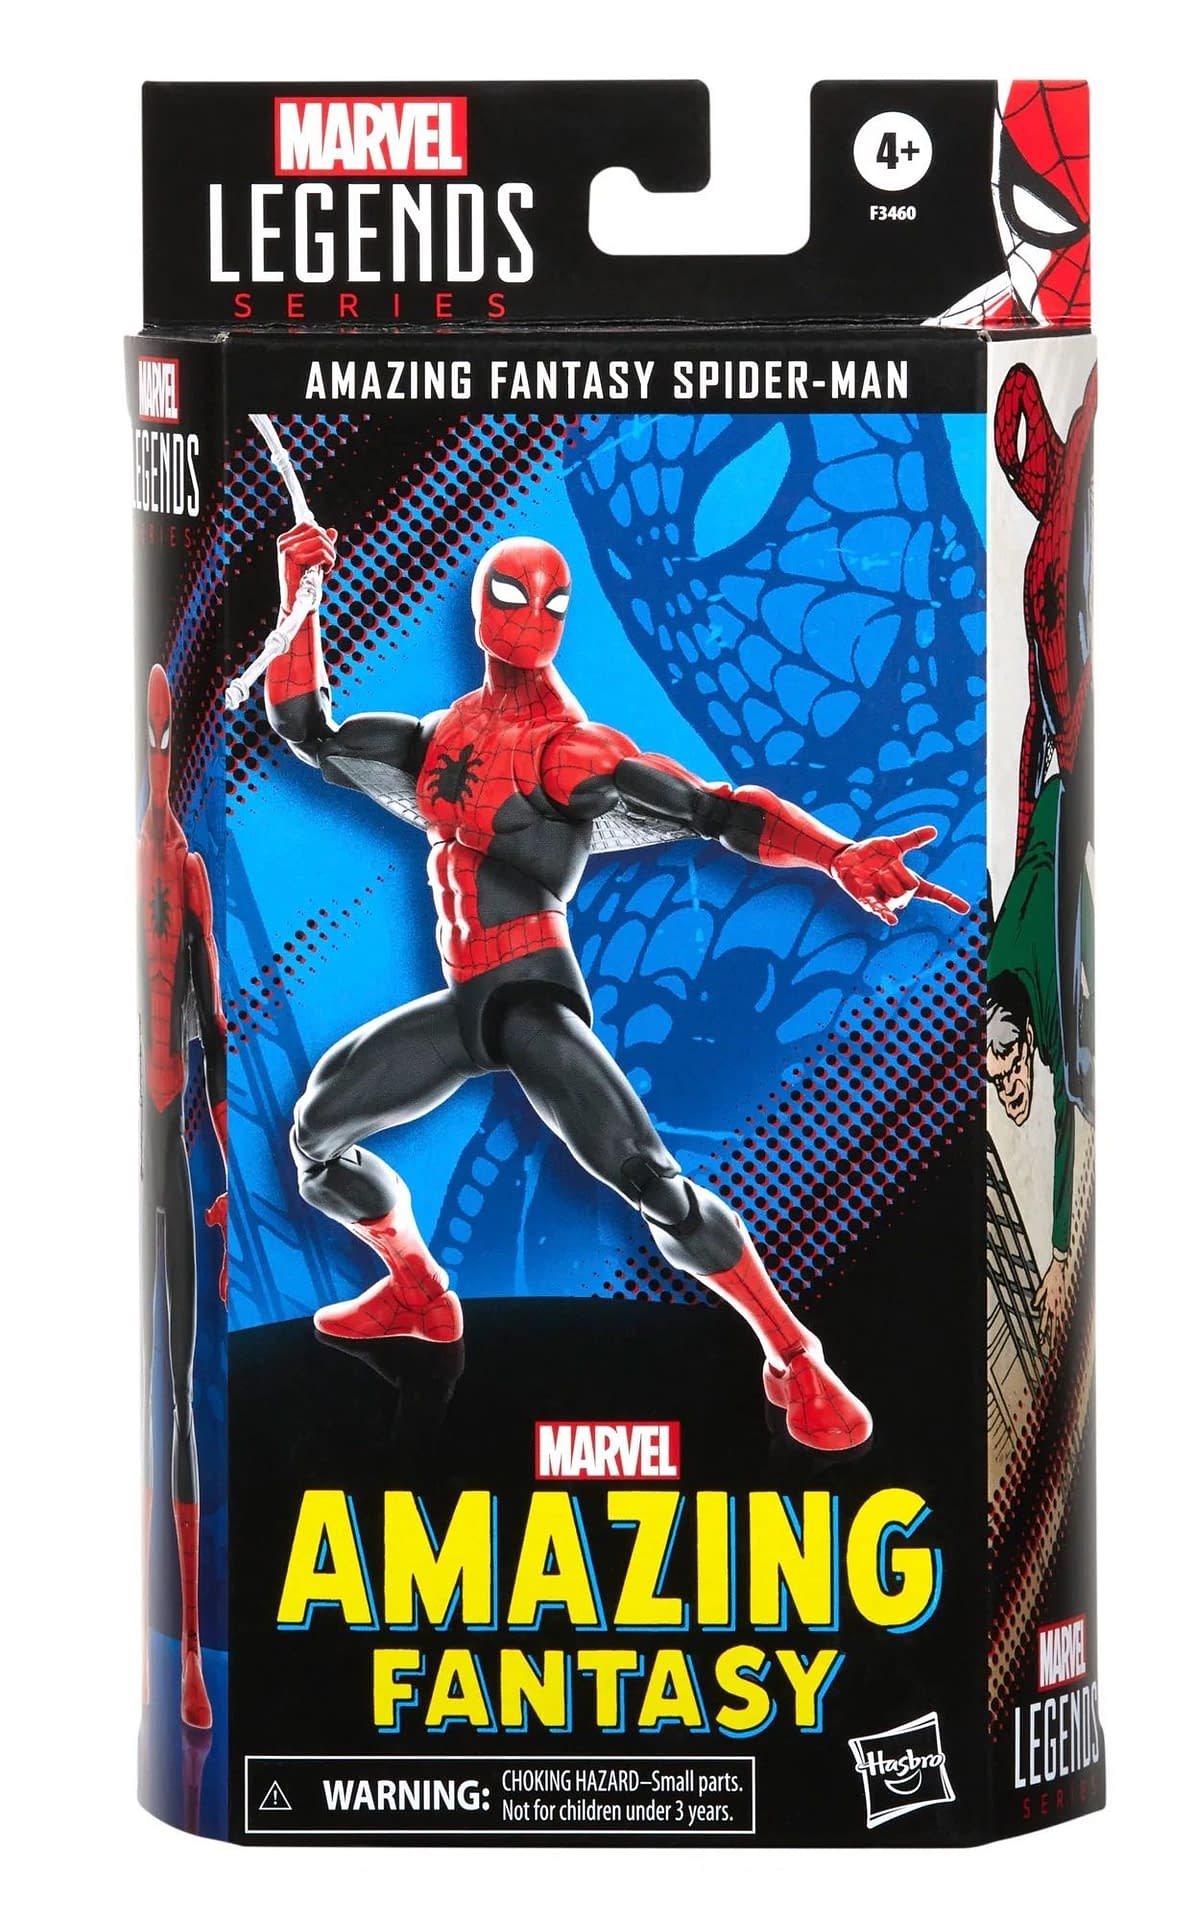 Marvel Legends New Window-less Packaging is Growing on Me